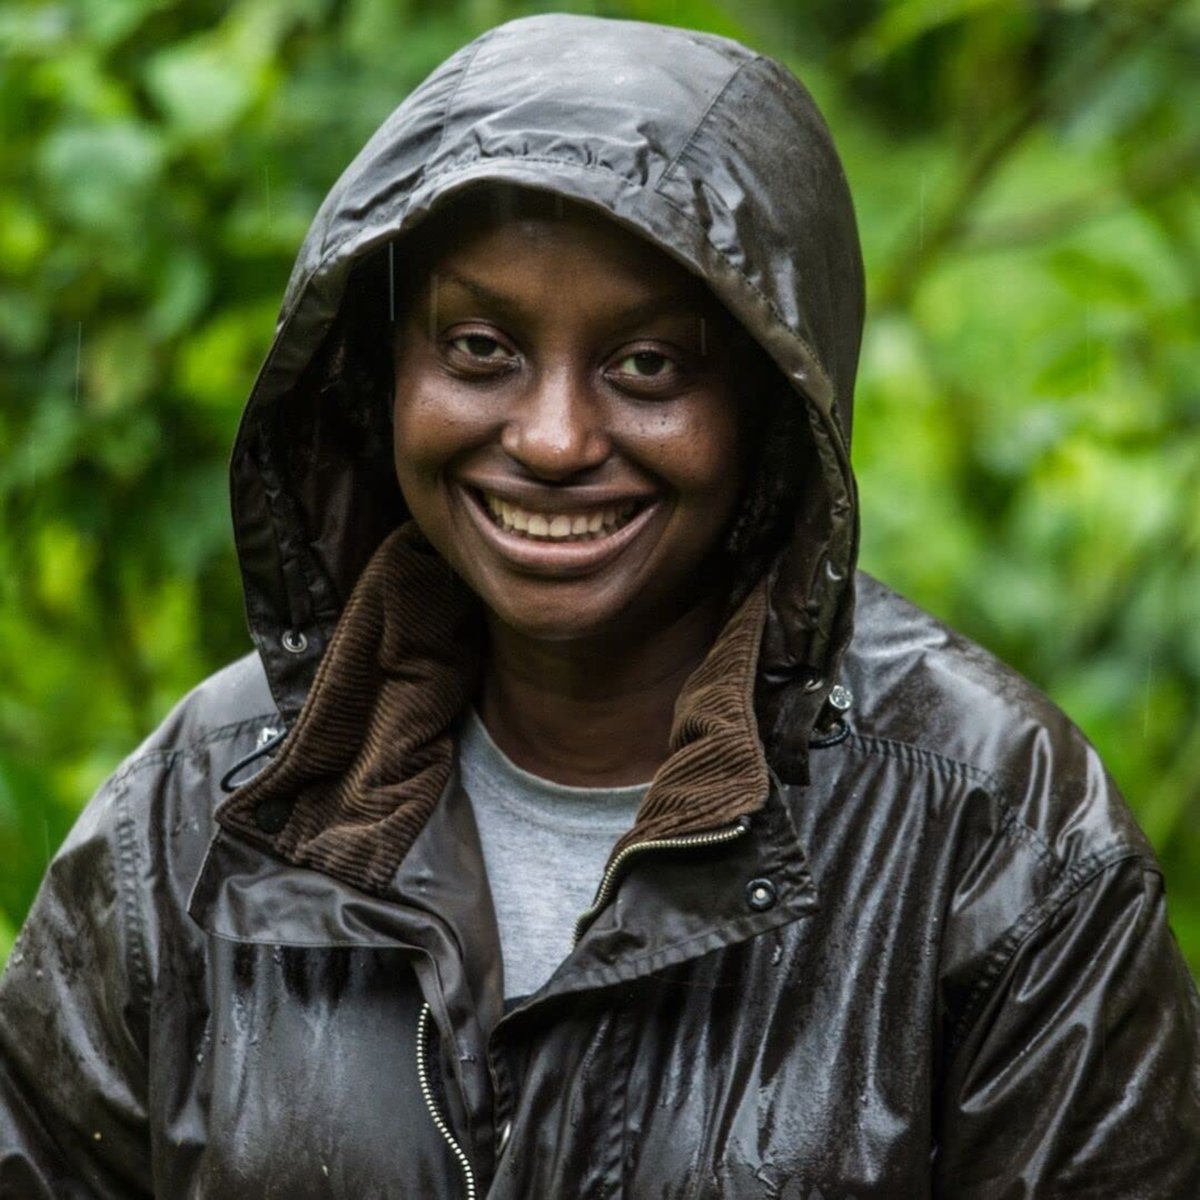 Our new President's Award was given to @DoctorGladys for her work improving gorilla and human health in Uganda with @CTPHuganda. Dr Kalema-Zikusoka was Uganda’s first wildlife vet! To find out more, read this blog post: mammalsociety.org.uk/blog/the-mamma… #conservation #wildlife #nature